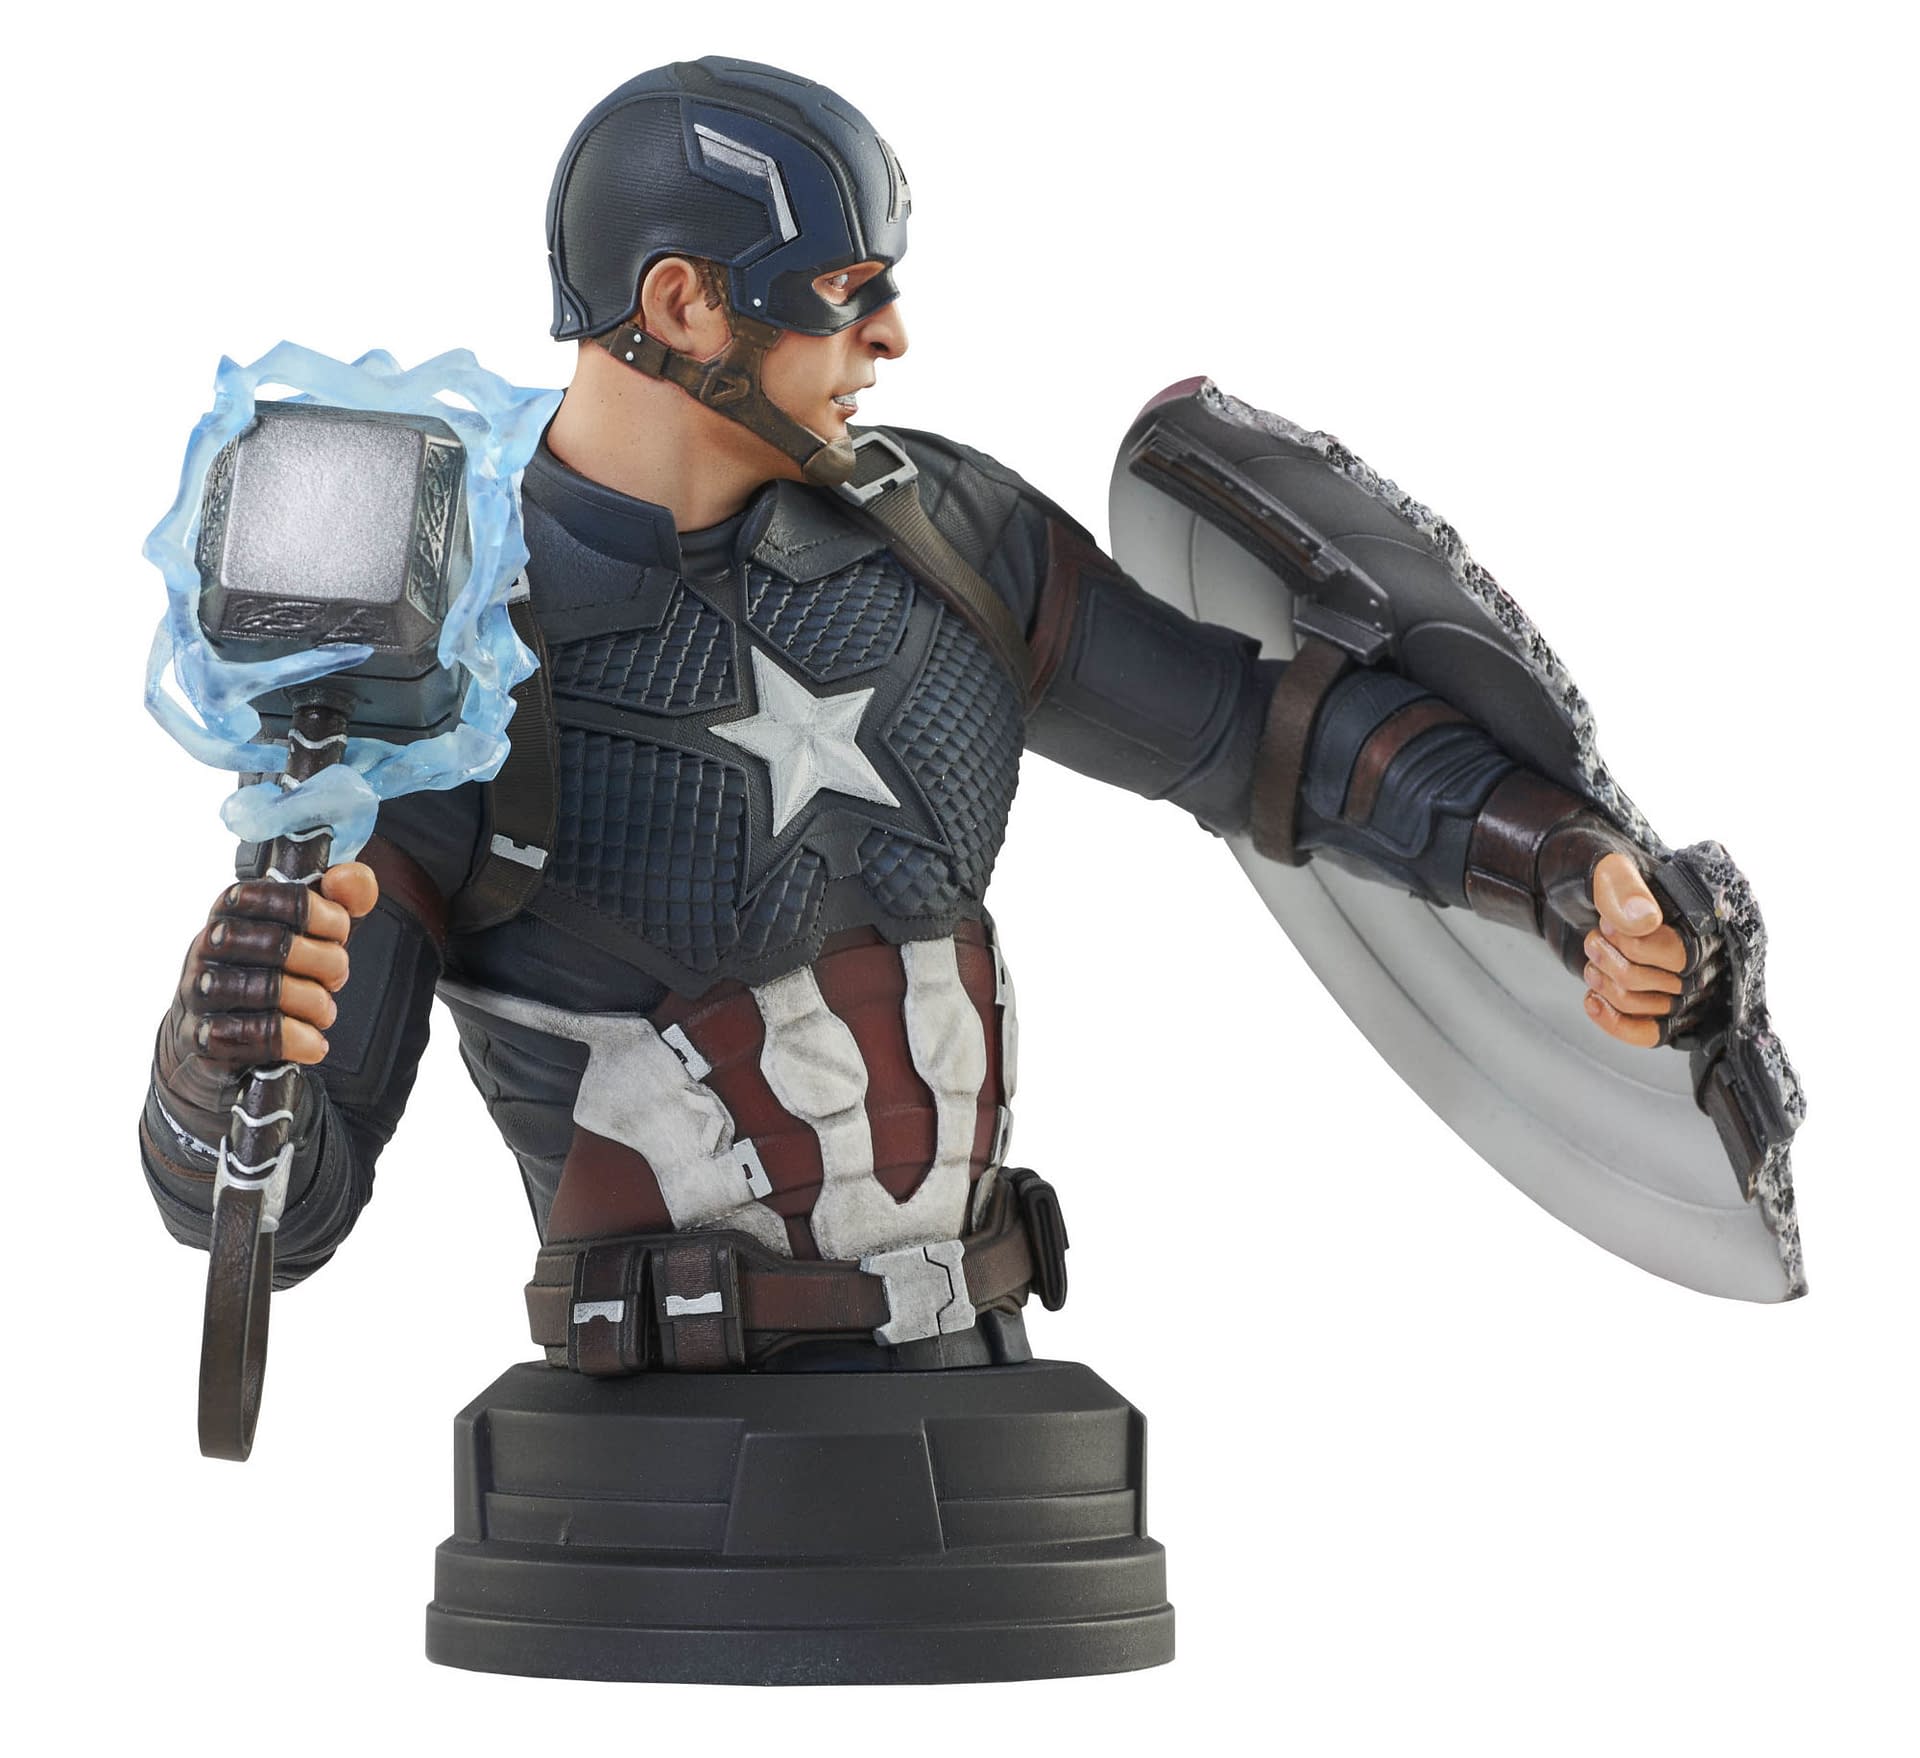 New Marvel Studios Statues Coming Soon from Diamond Select Toys 